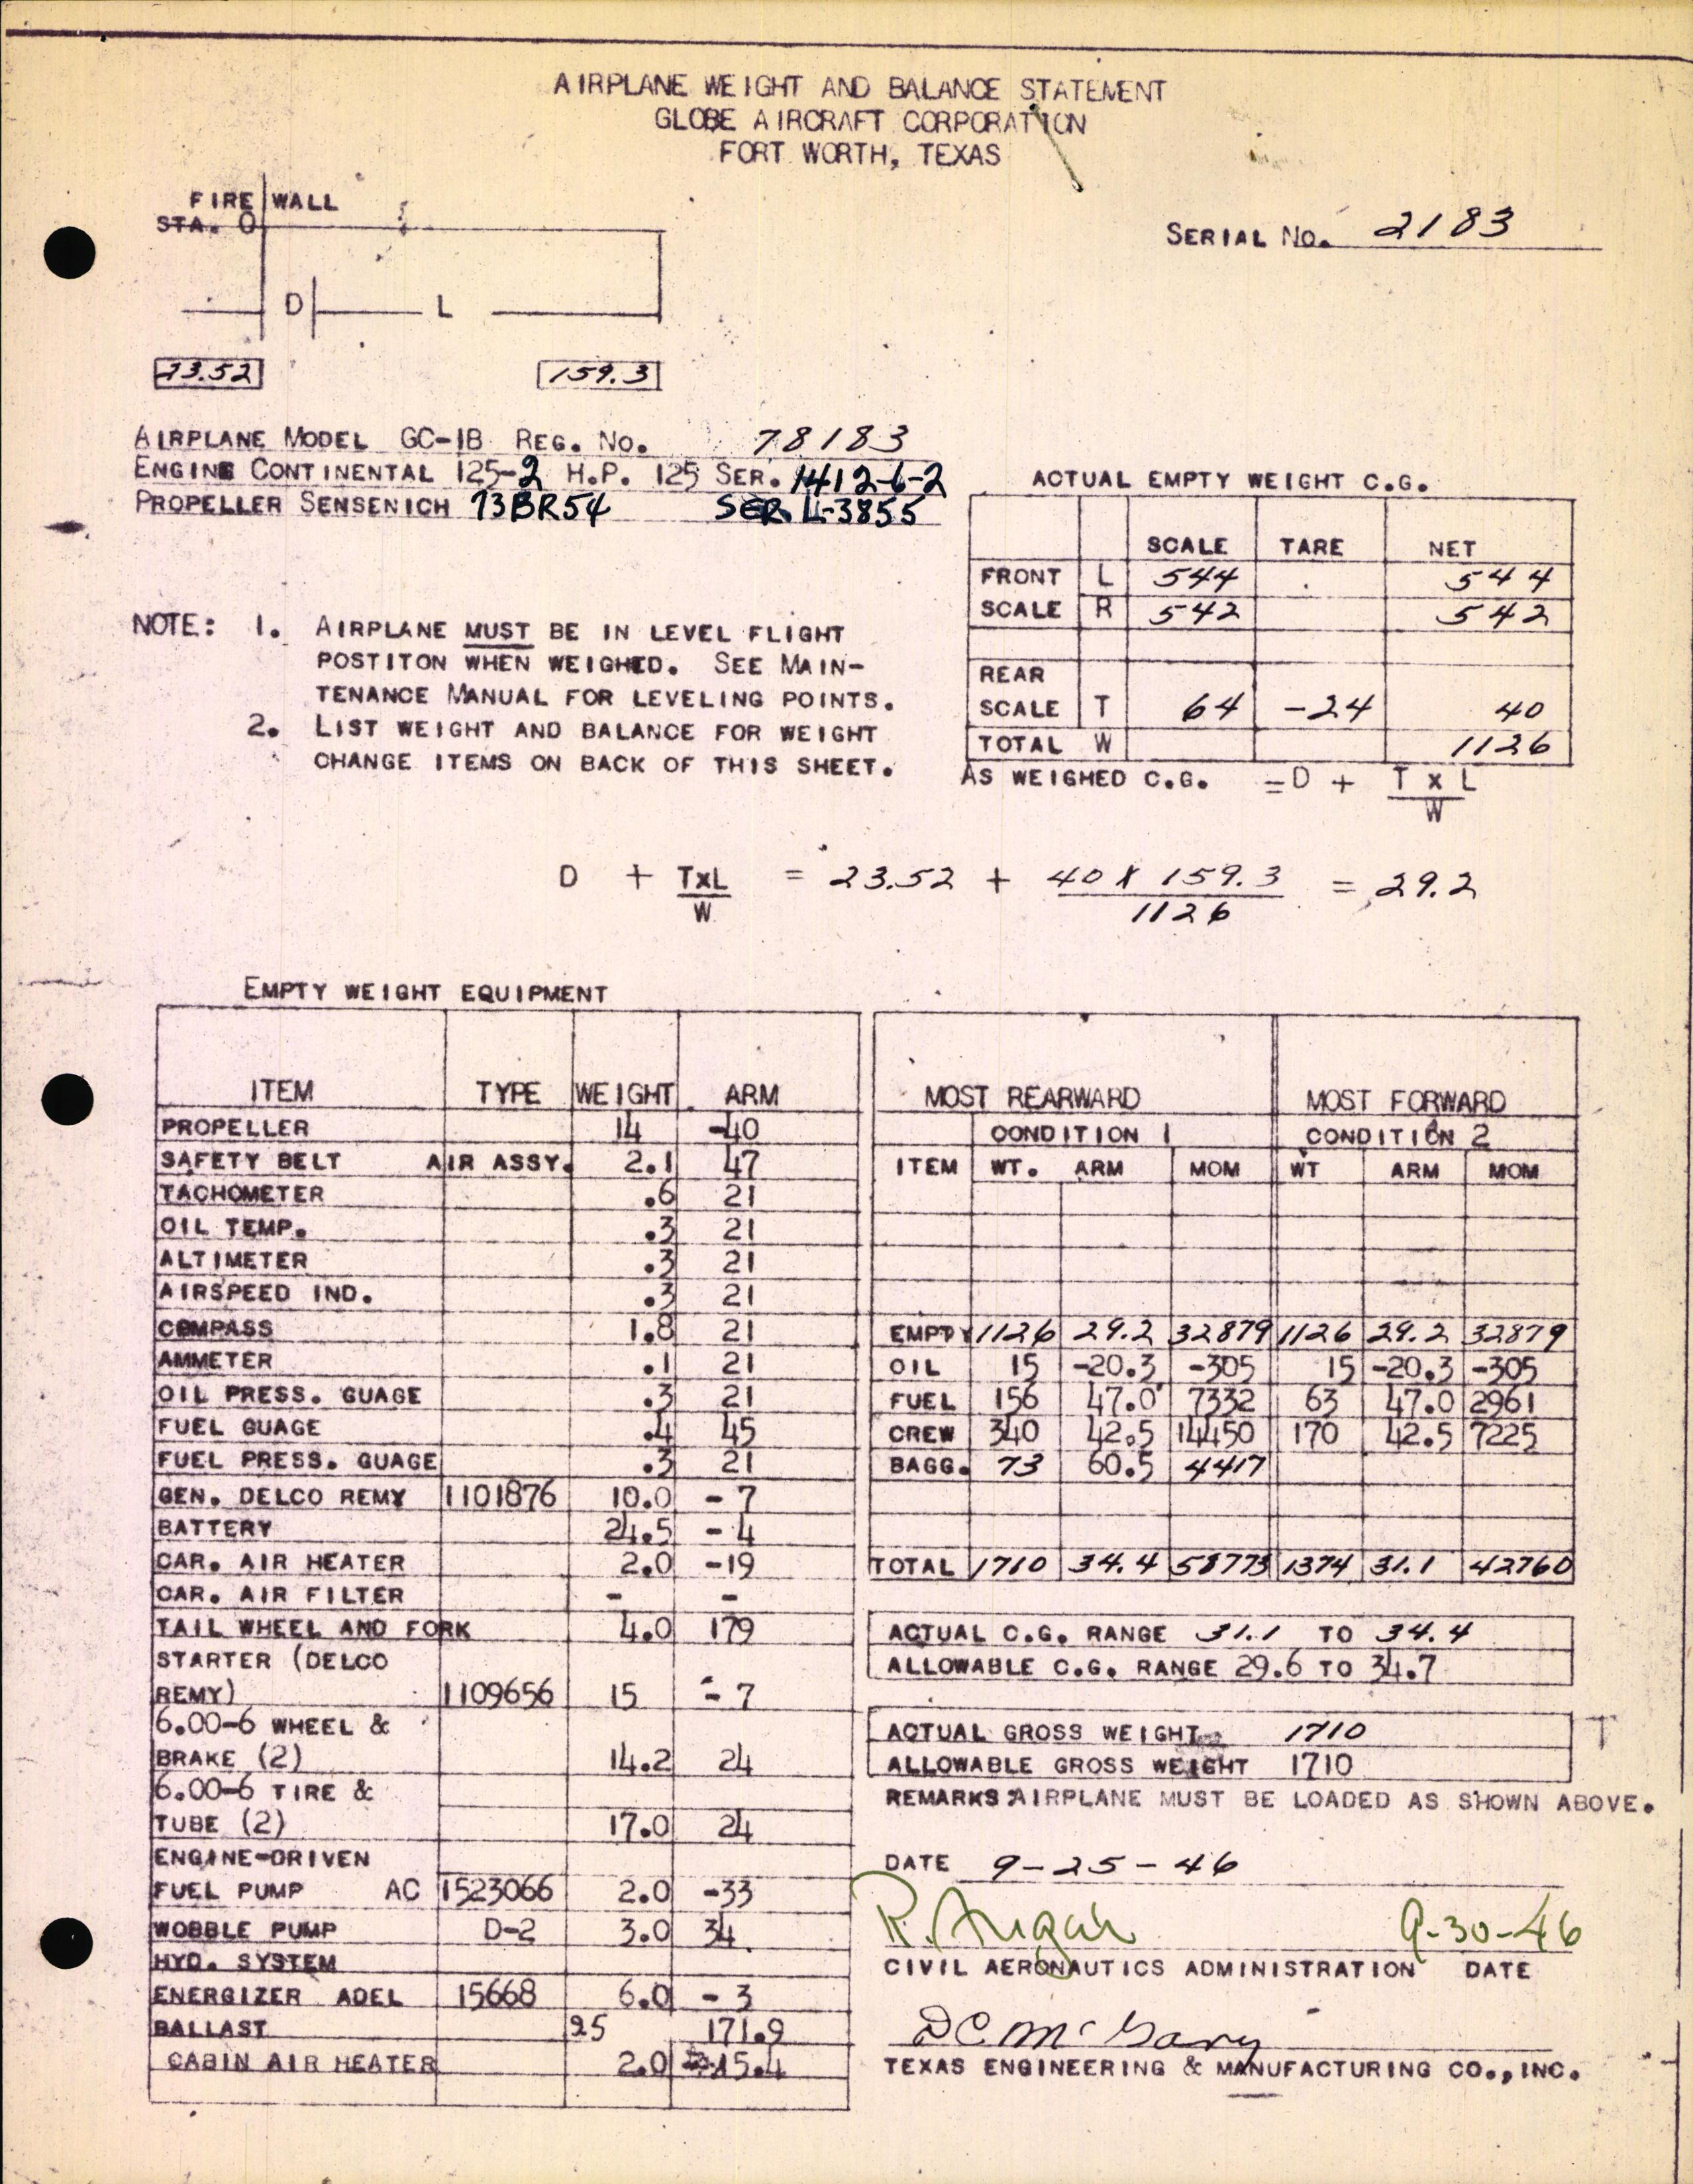 Sample page 3 from AirCorps Library document: Technical Information for Serial Number 2183